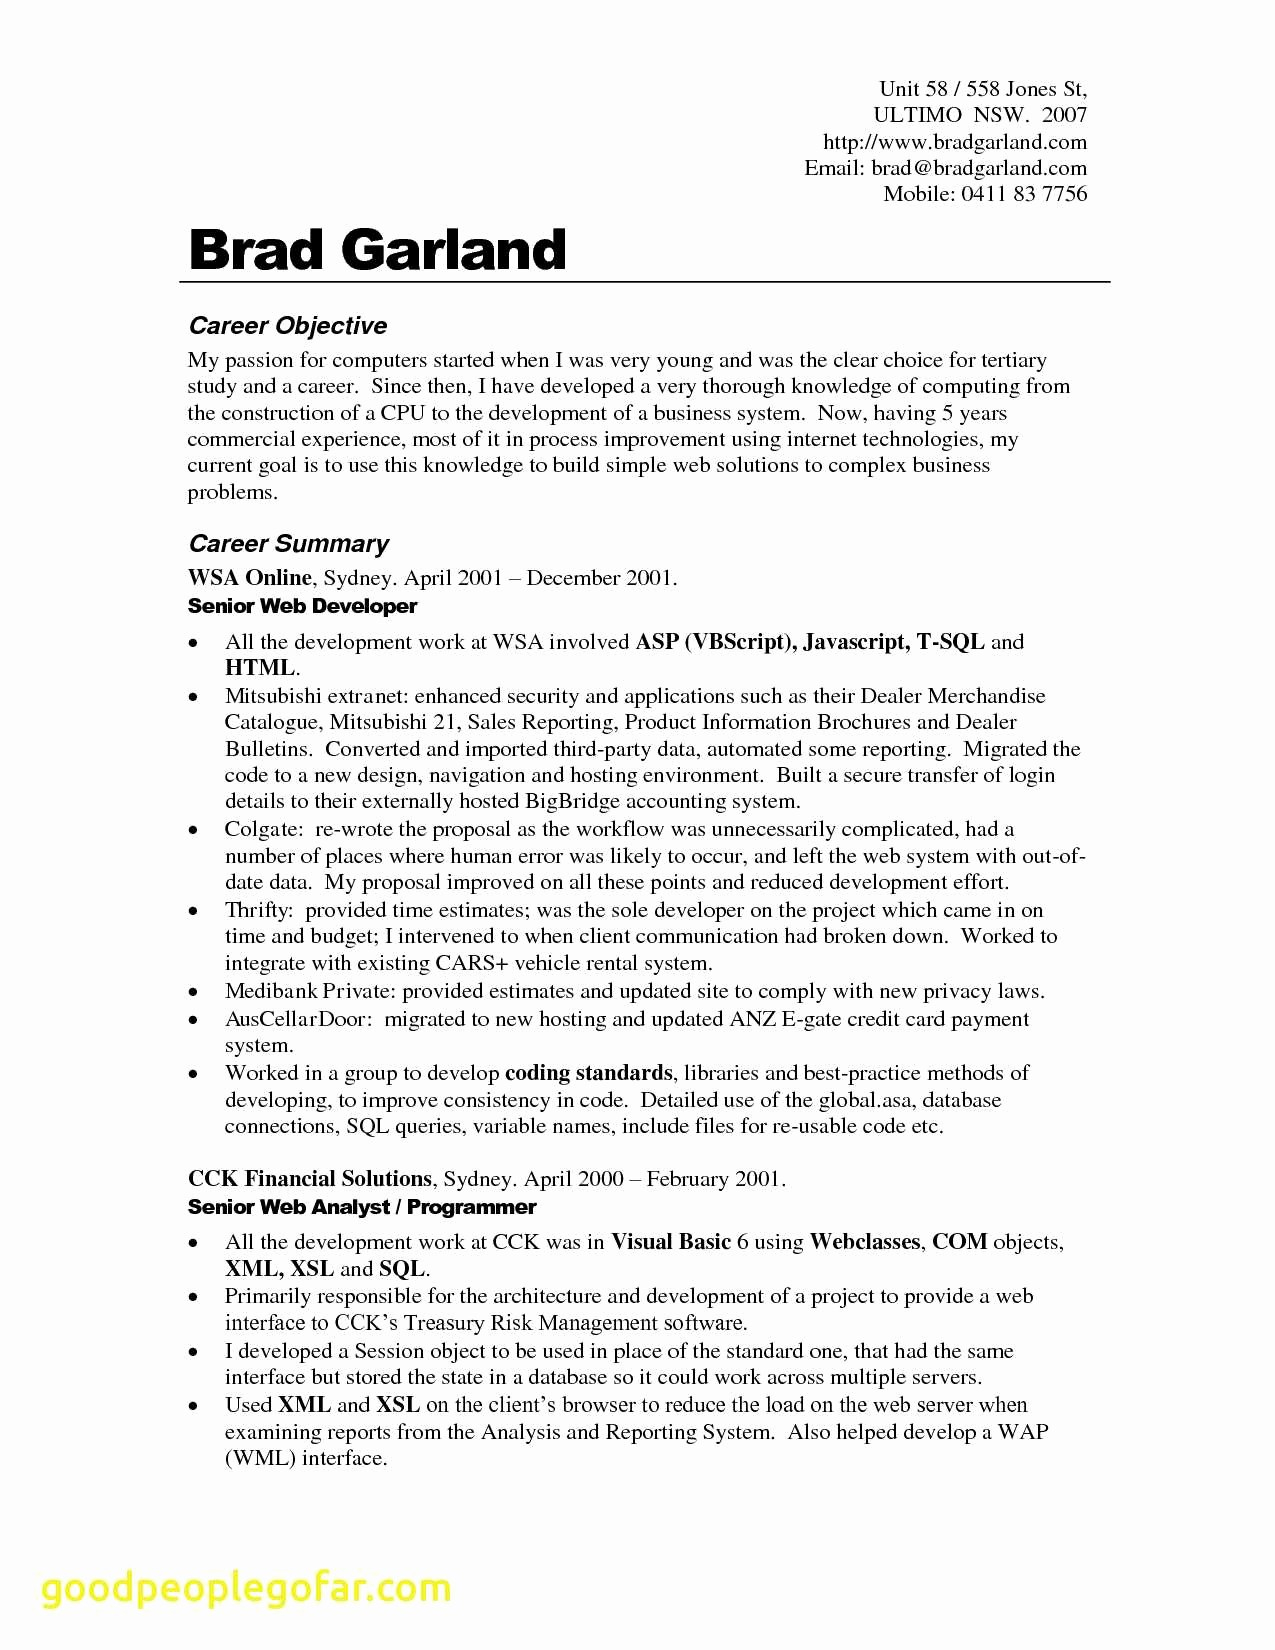 Estate Planning Letter Of Instruction Template - Templates for Resume ats Friendly Resume ats Friendly Resume Awe